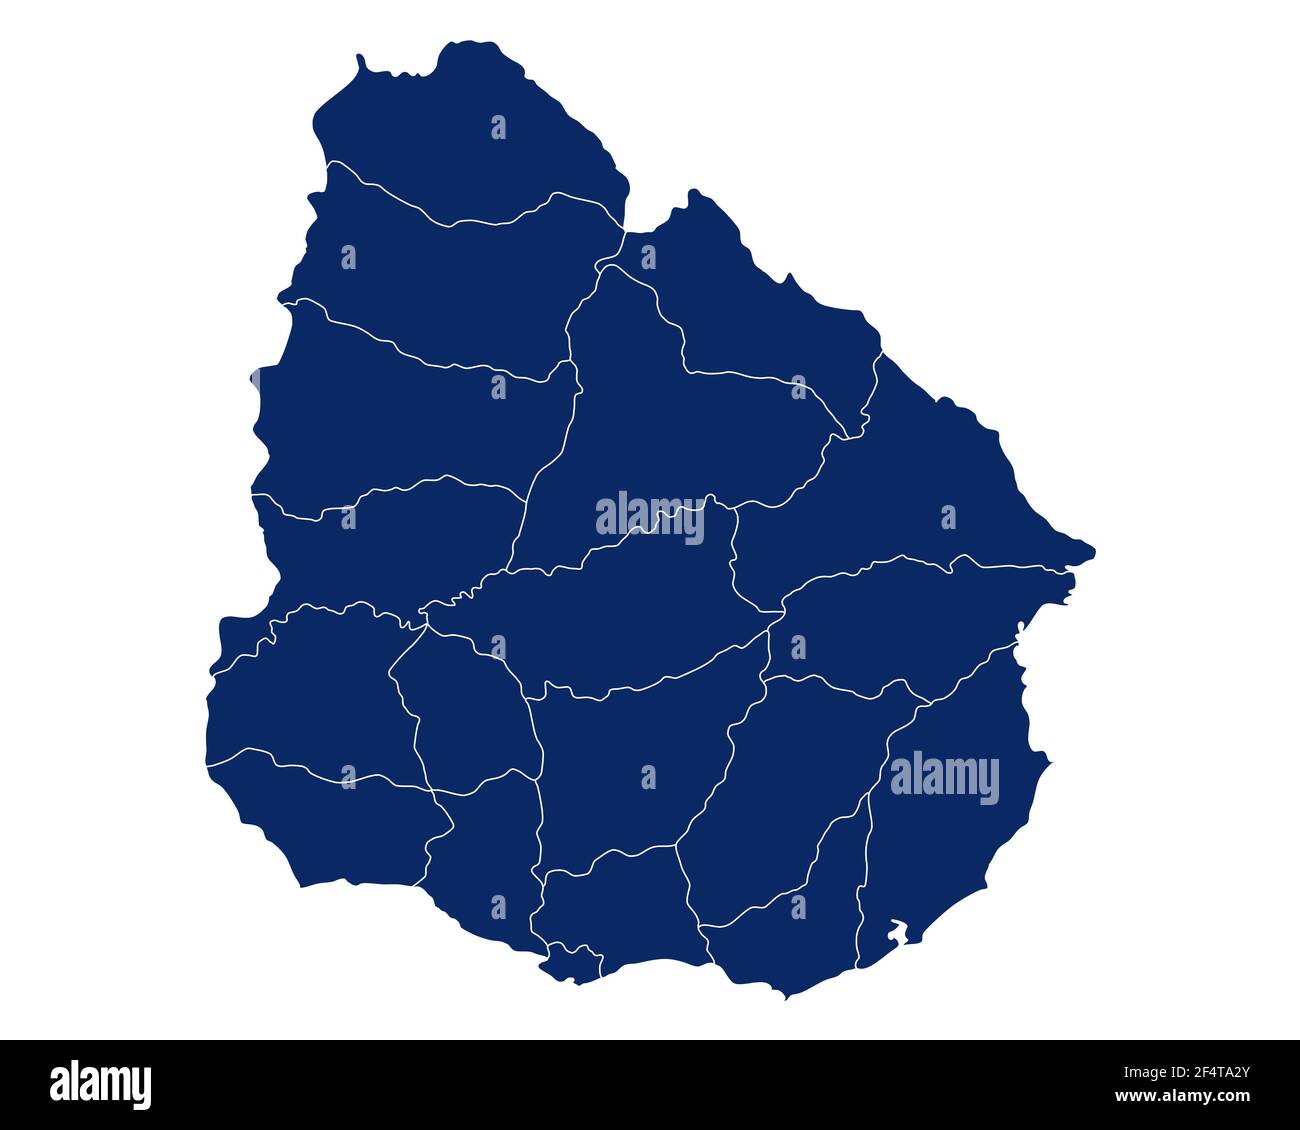 Map Of Uruguay With Regions And Borders Stock Photo Alamy